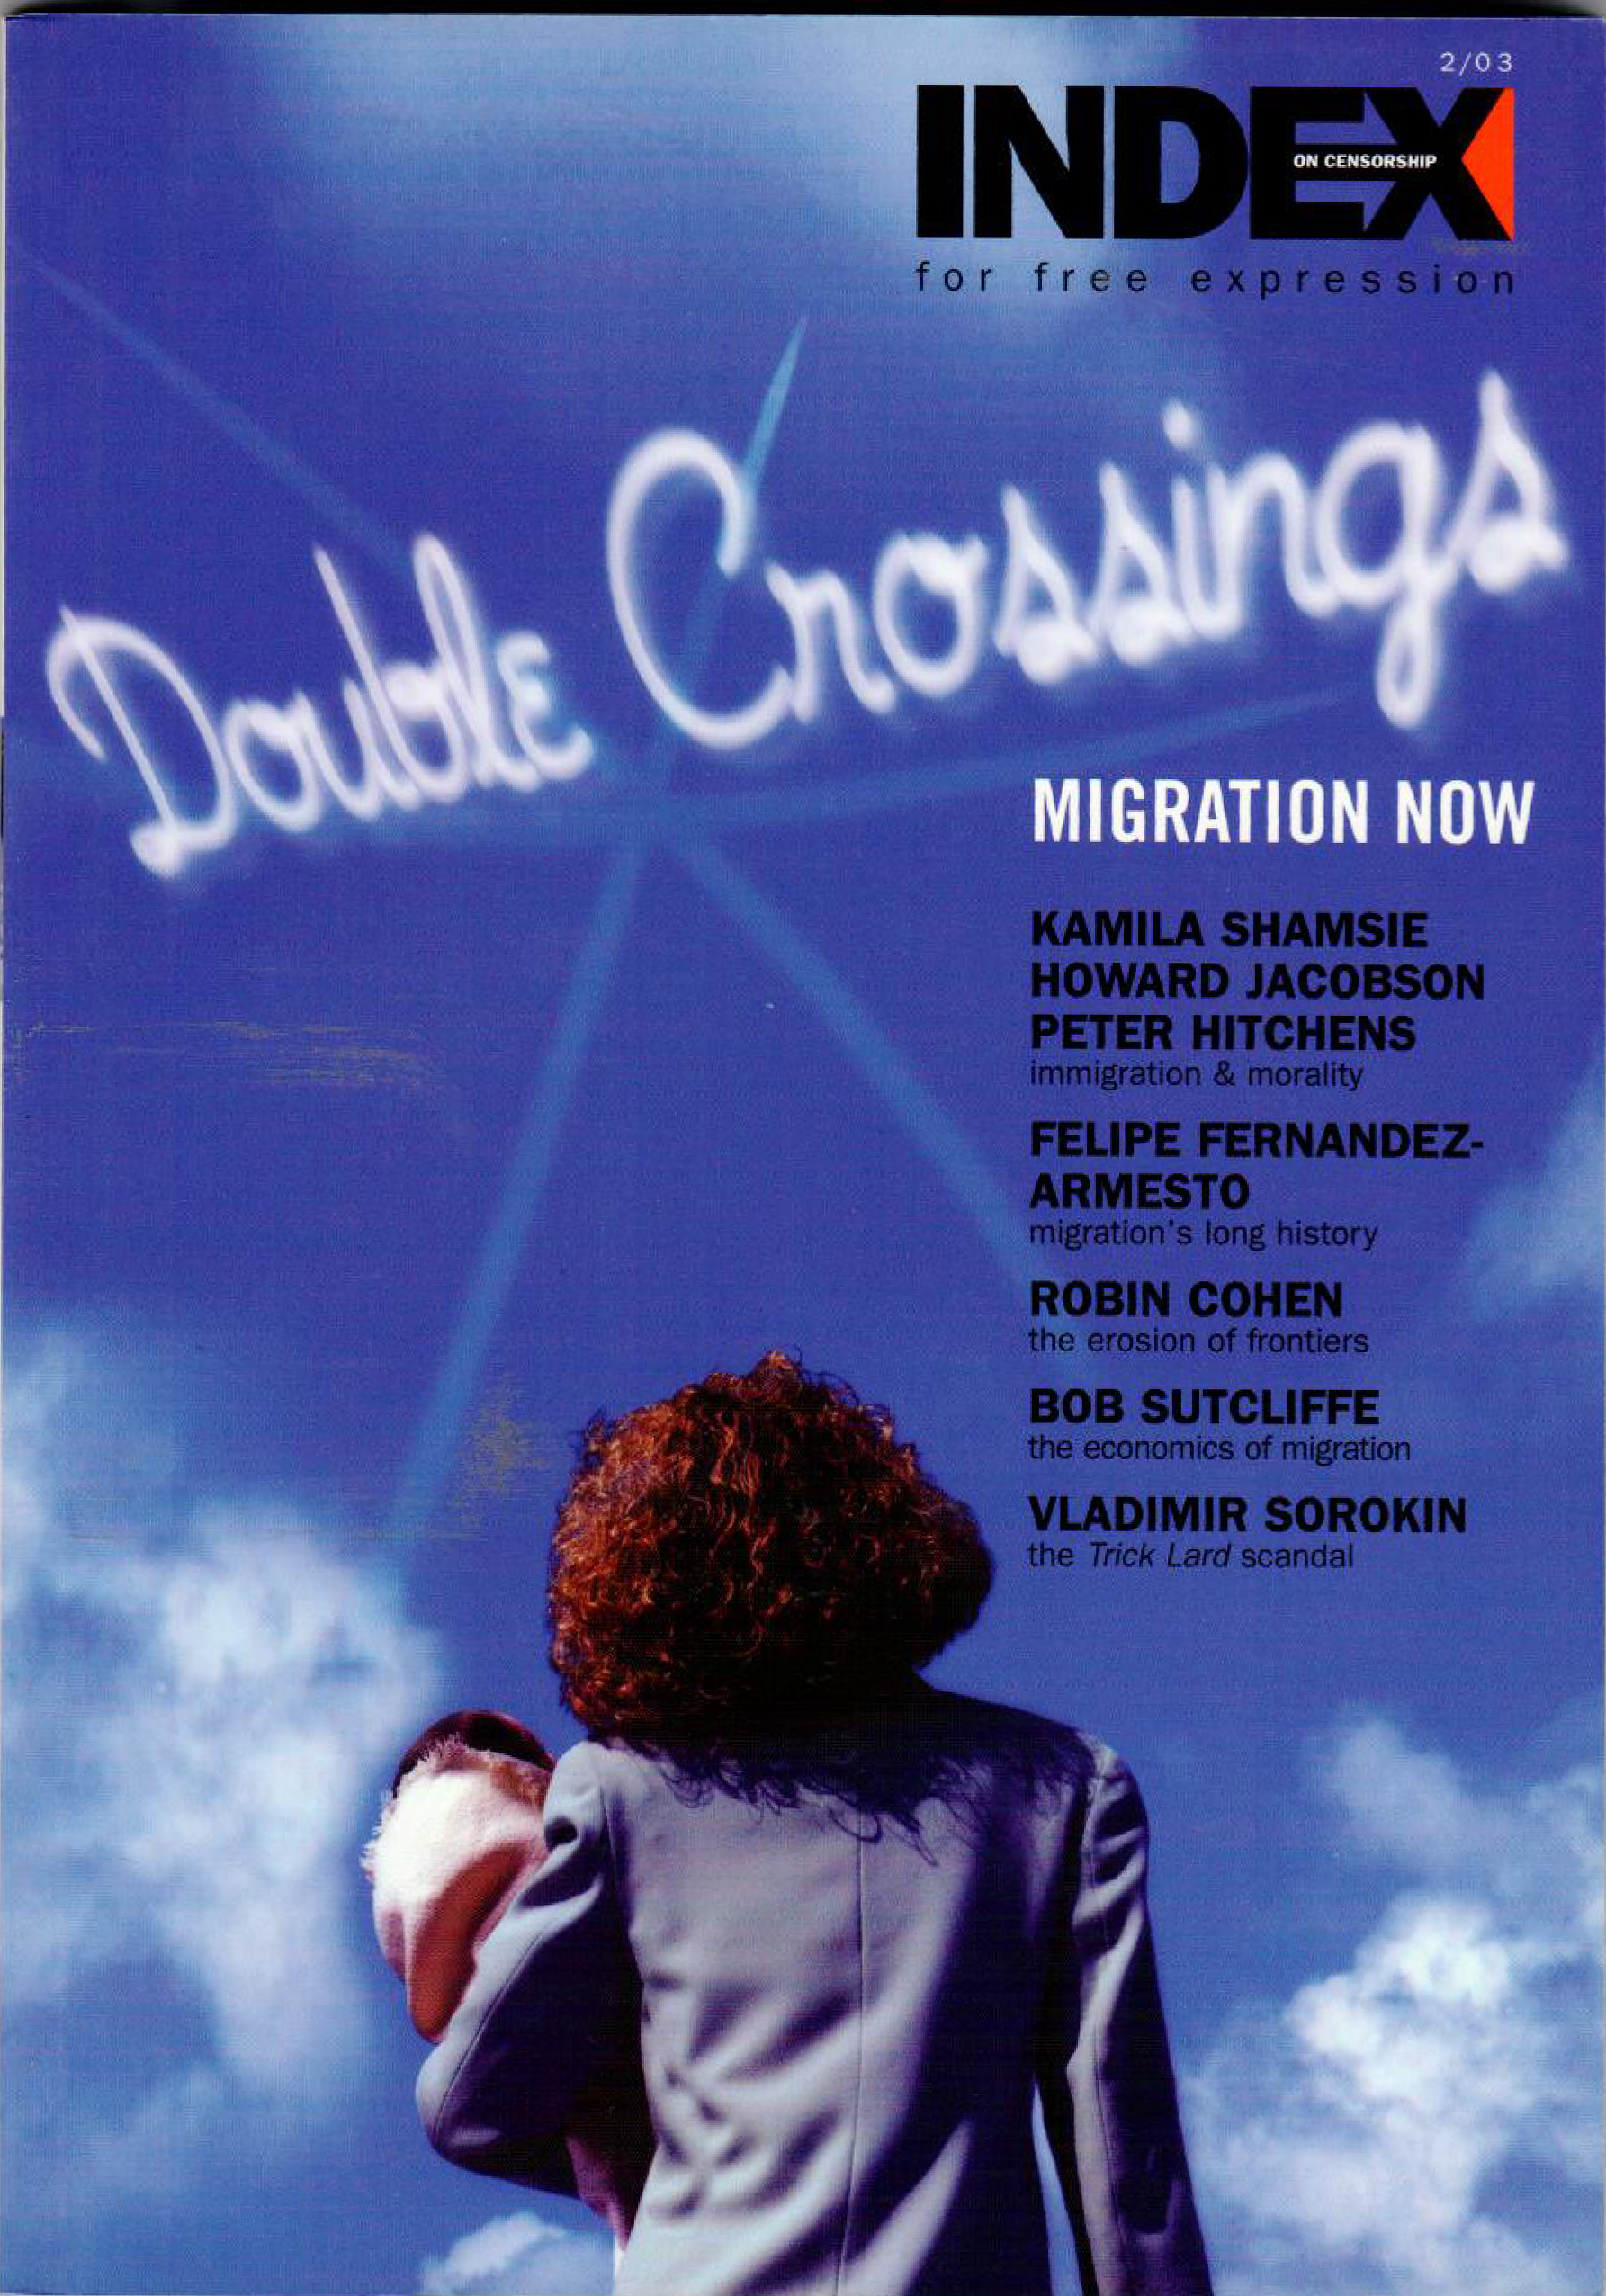 Double crossings: Migration now